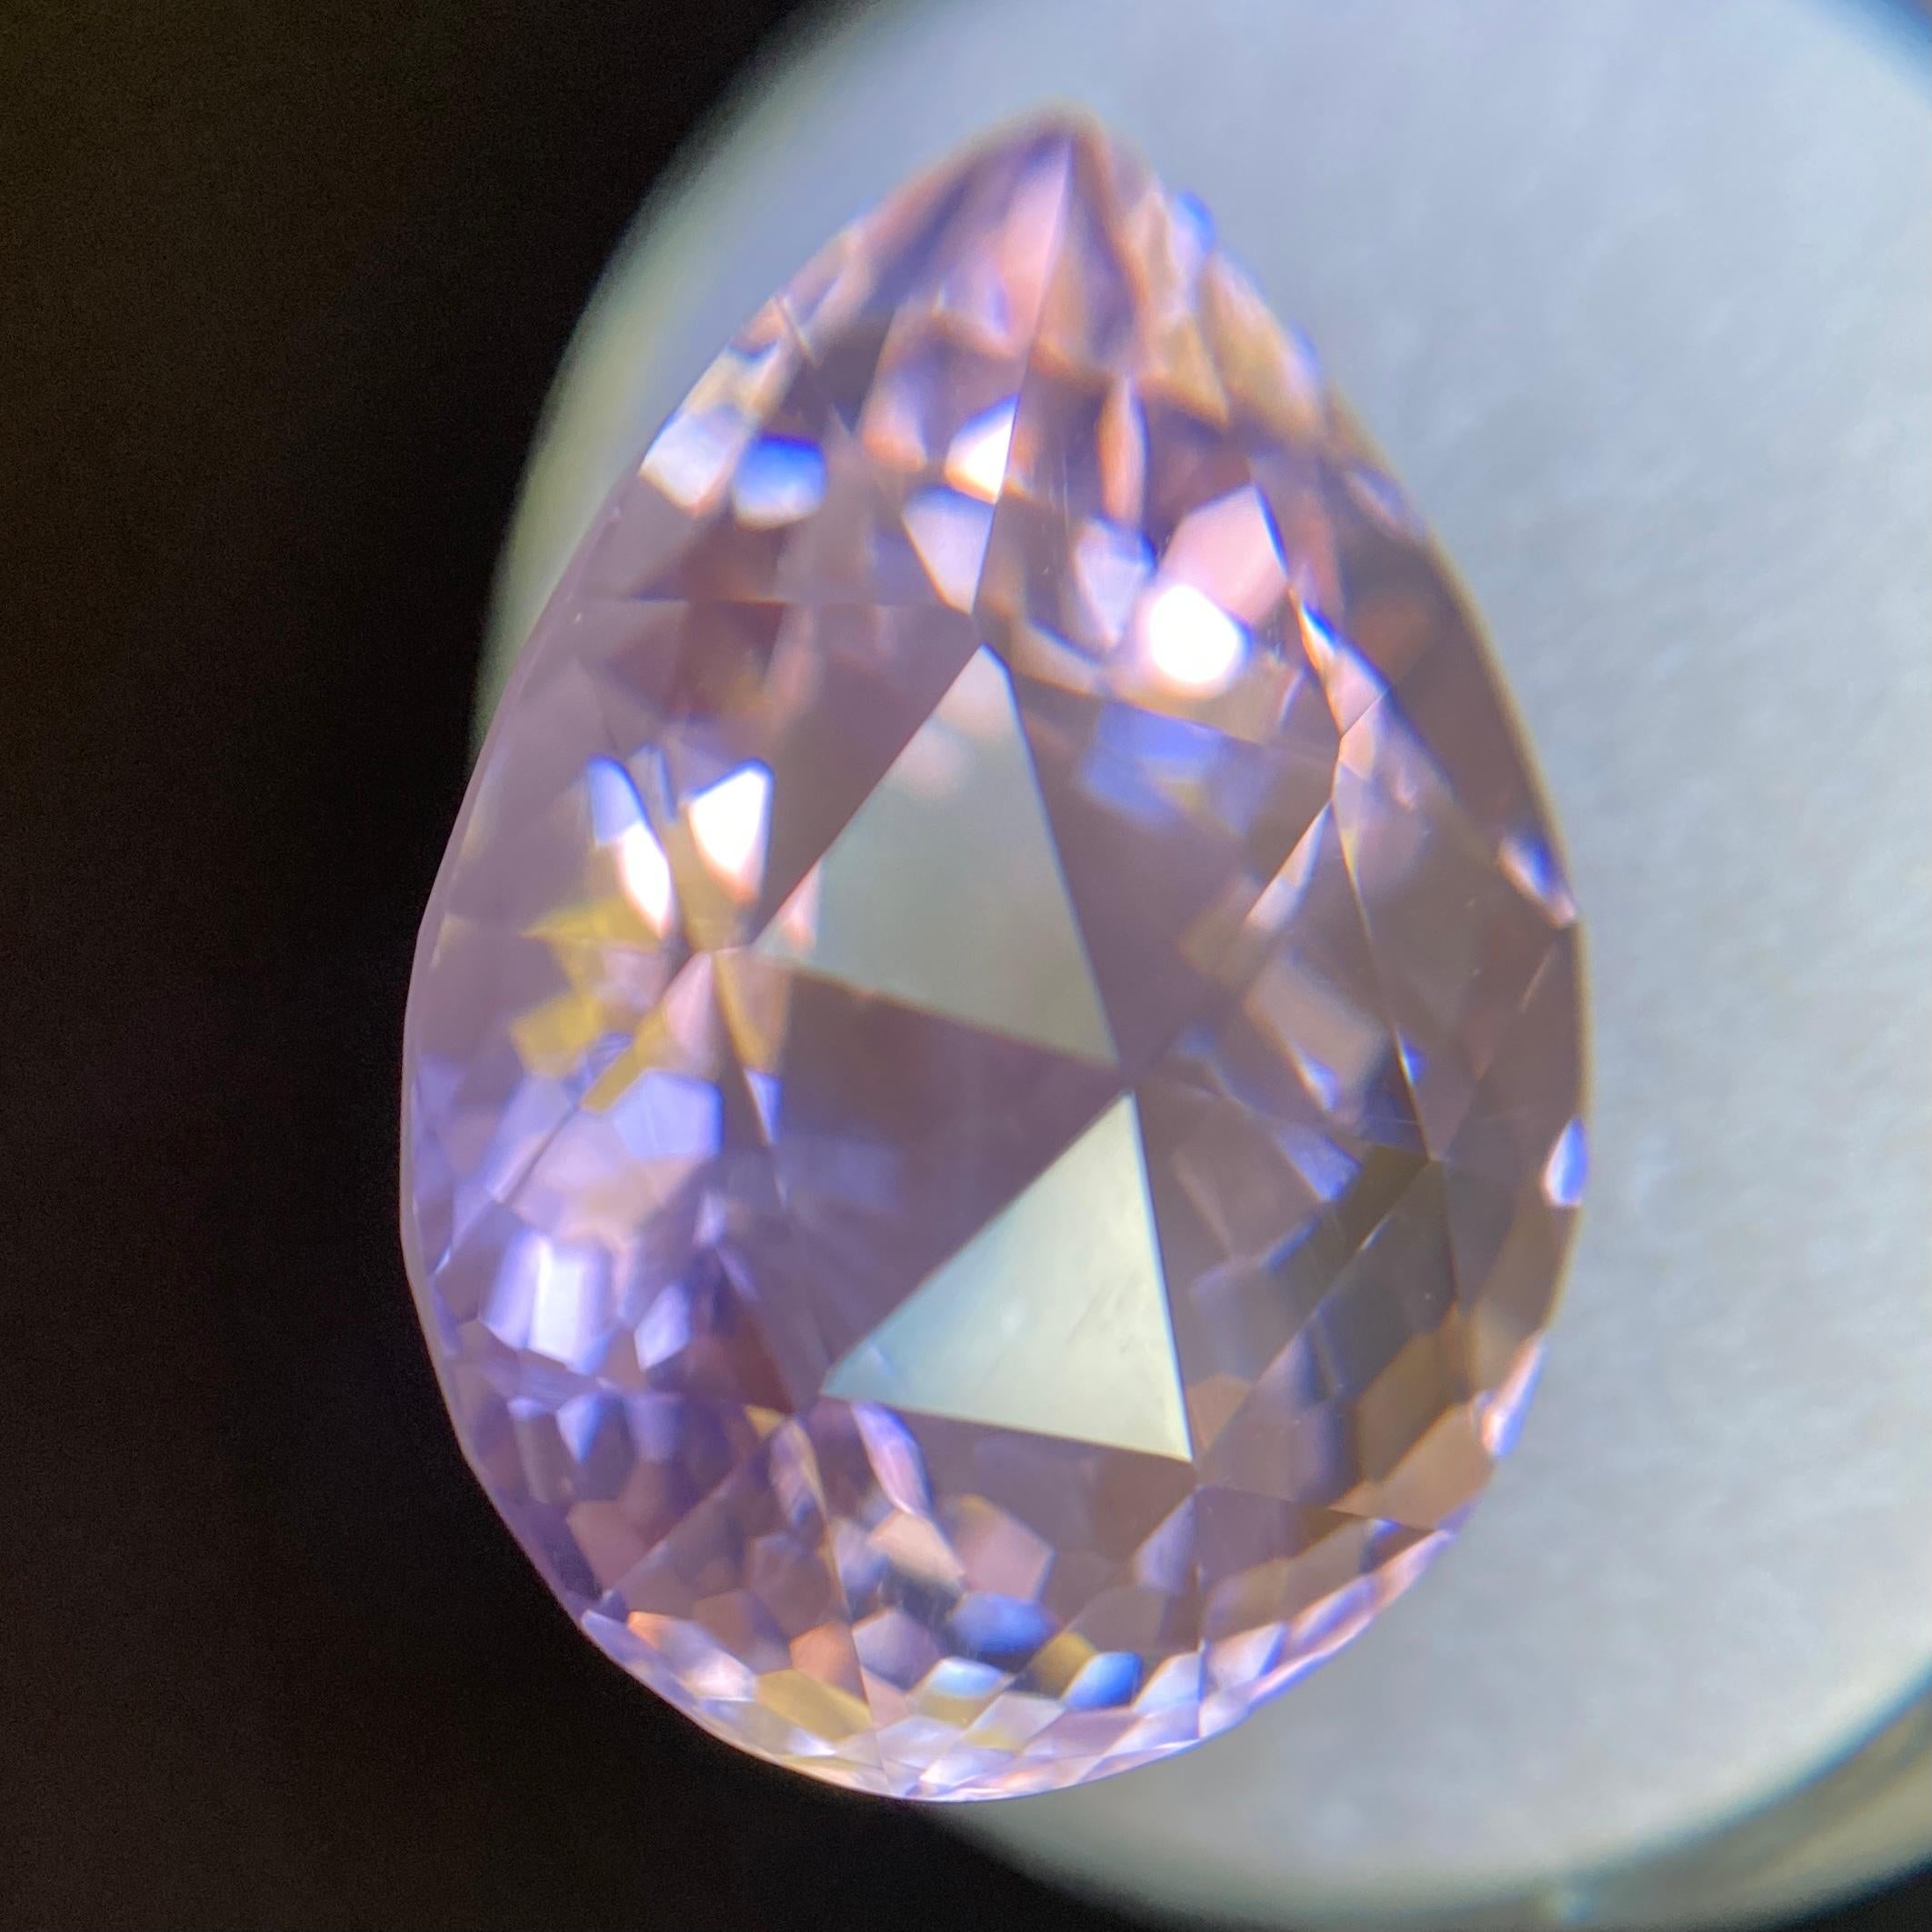 Fine Natural Purple Amethyst Gemstone.

Large 20.79 carat with a beautiful ‘Rose De France’ purple colour and excellent clarity - very clean gem.

Also has an excellent fancy rose pear cut with ideal polish to show great shine and colour, would look